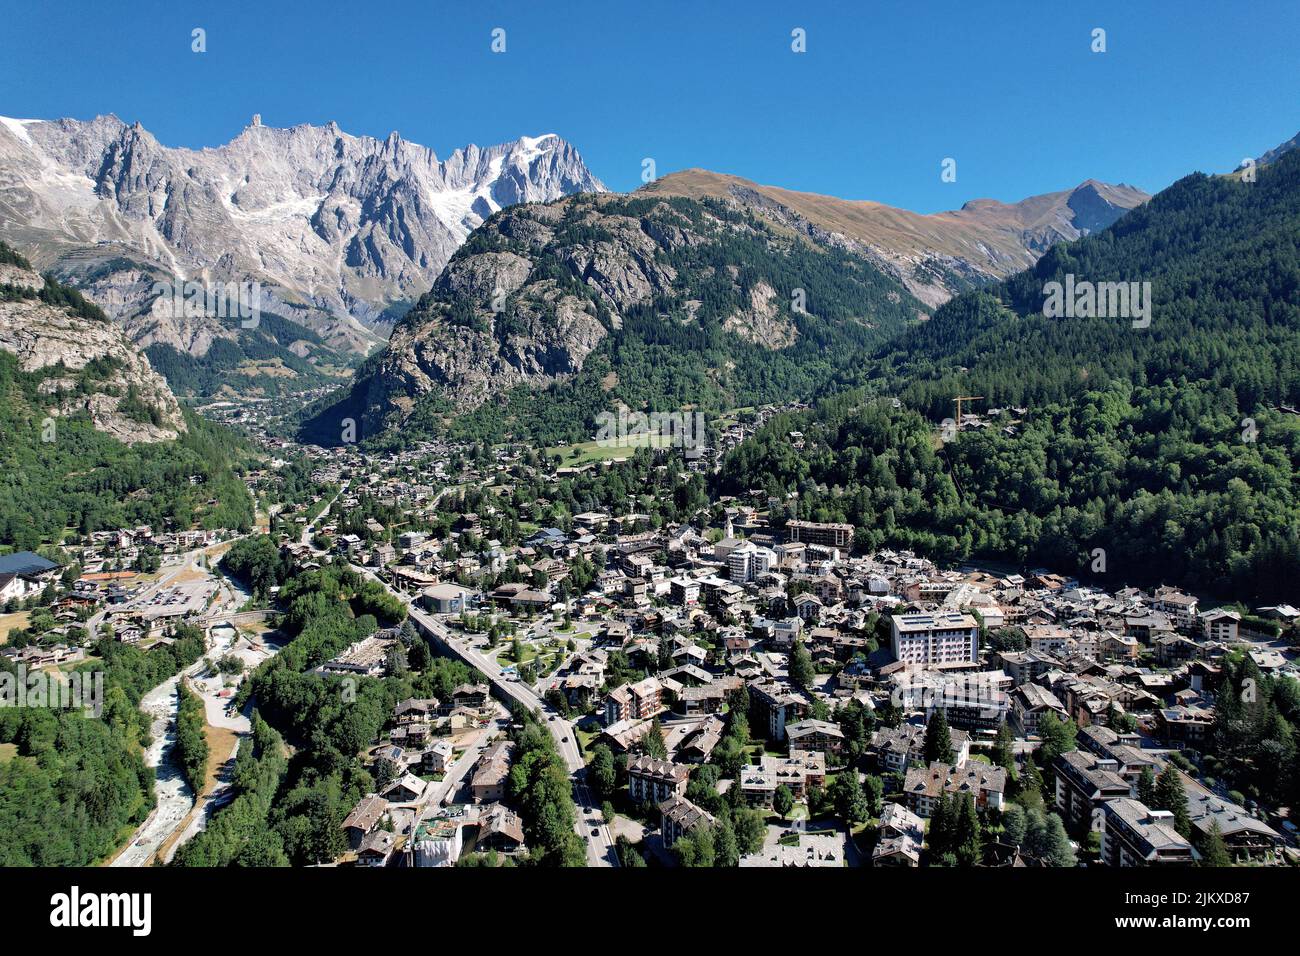 View of the mountain village of courmayeur in Italy alps Stock Photo